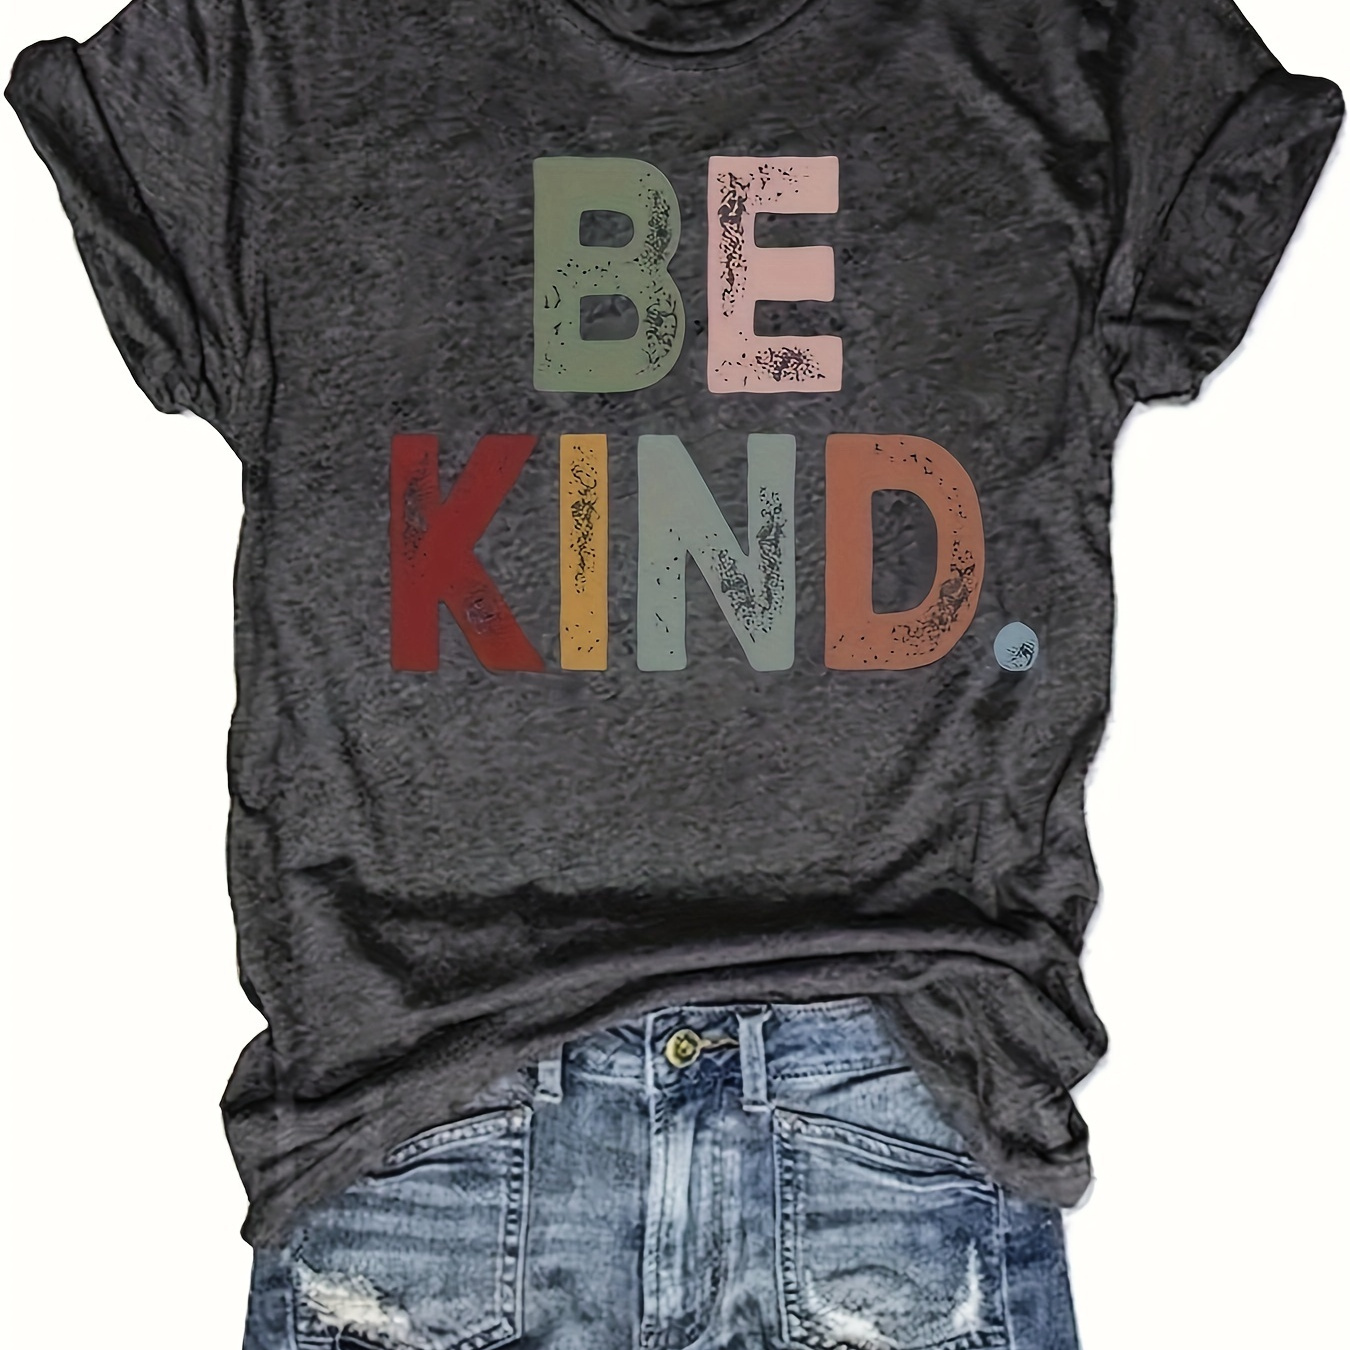 

Be Kind Letter Print T-shirt, Casual Short Sleeve Crew Neck Top For Spring & Summer, Women's Clothing